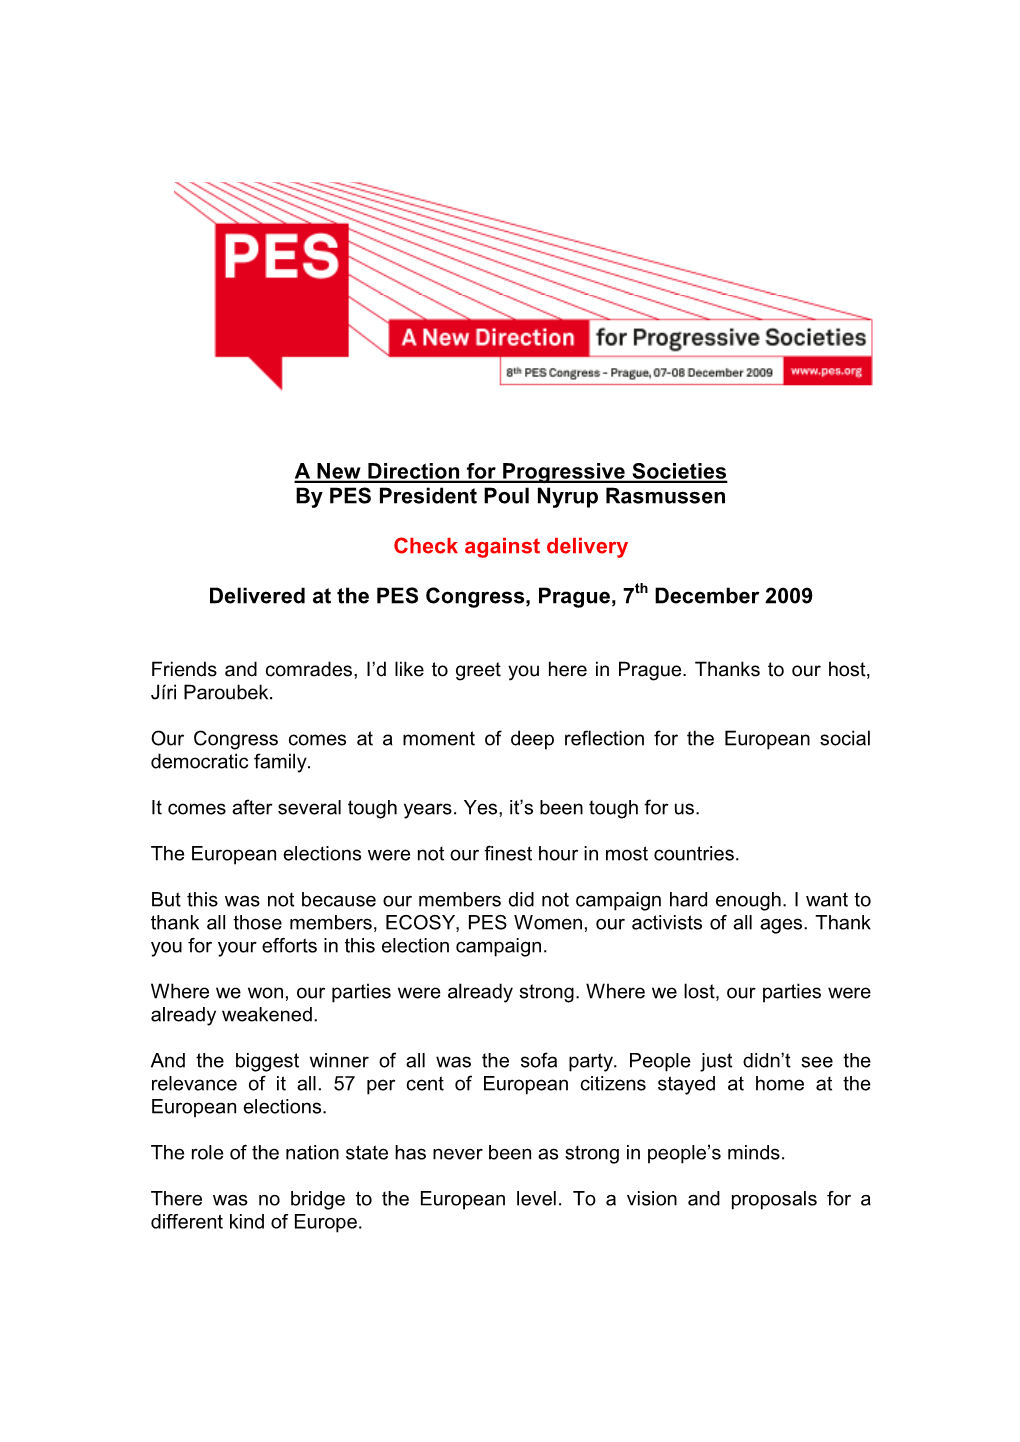 A New Direction for Progressive Societies by PES President Poul Nyrup Rasmussen